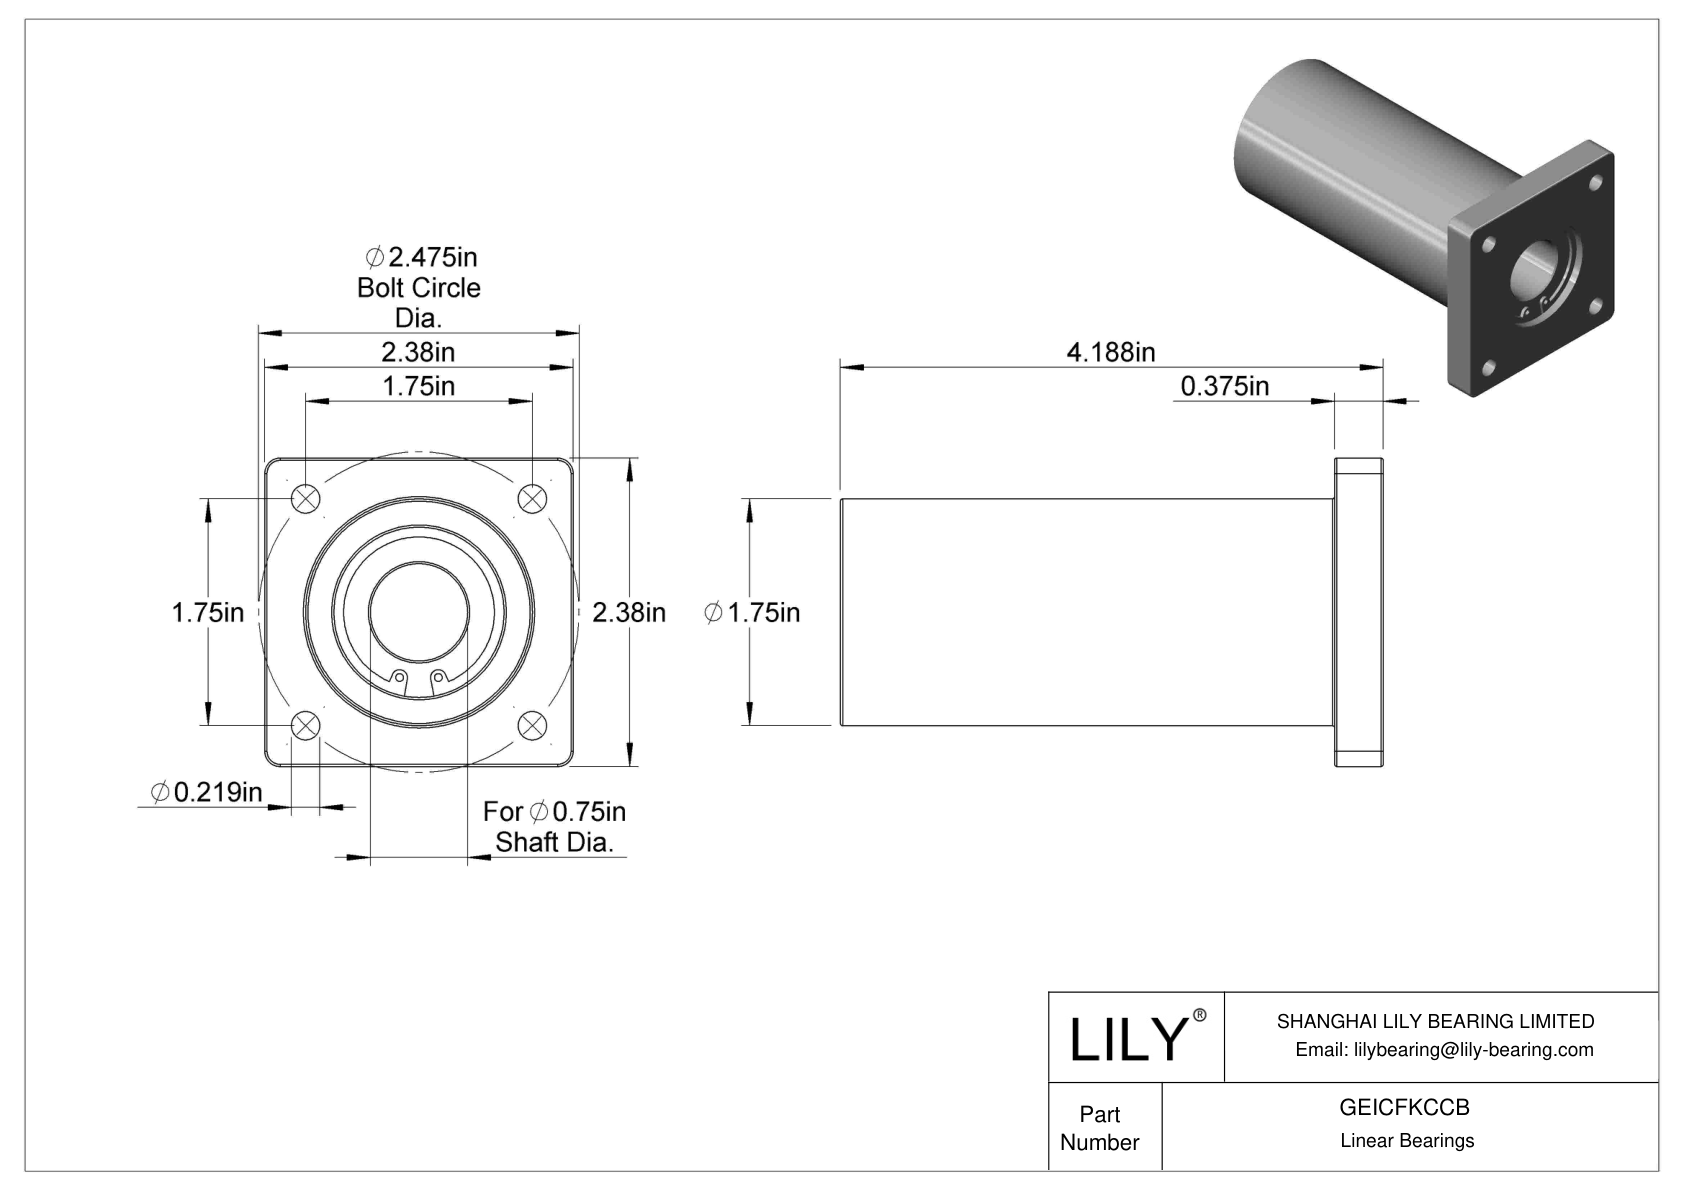 GEICFKCCB Chemical-Resistant Flange-Mounted Linear Sleeve Bearings cad drawing